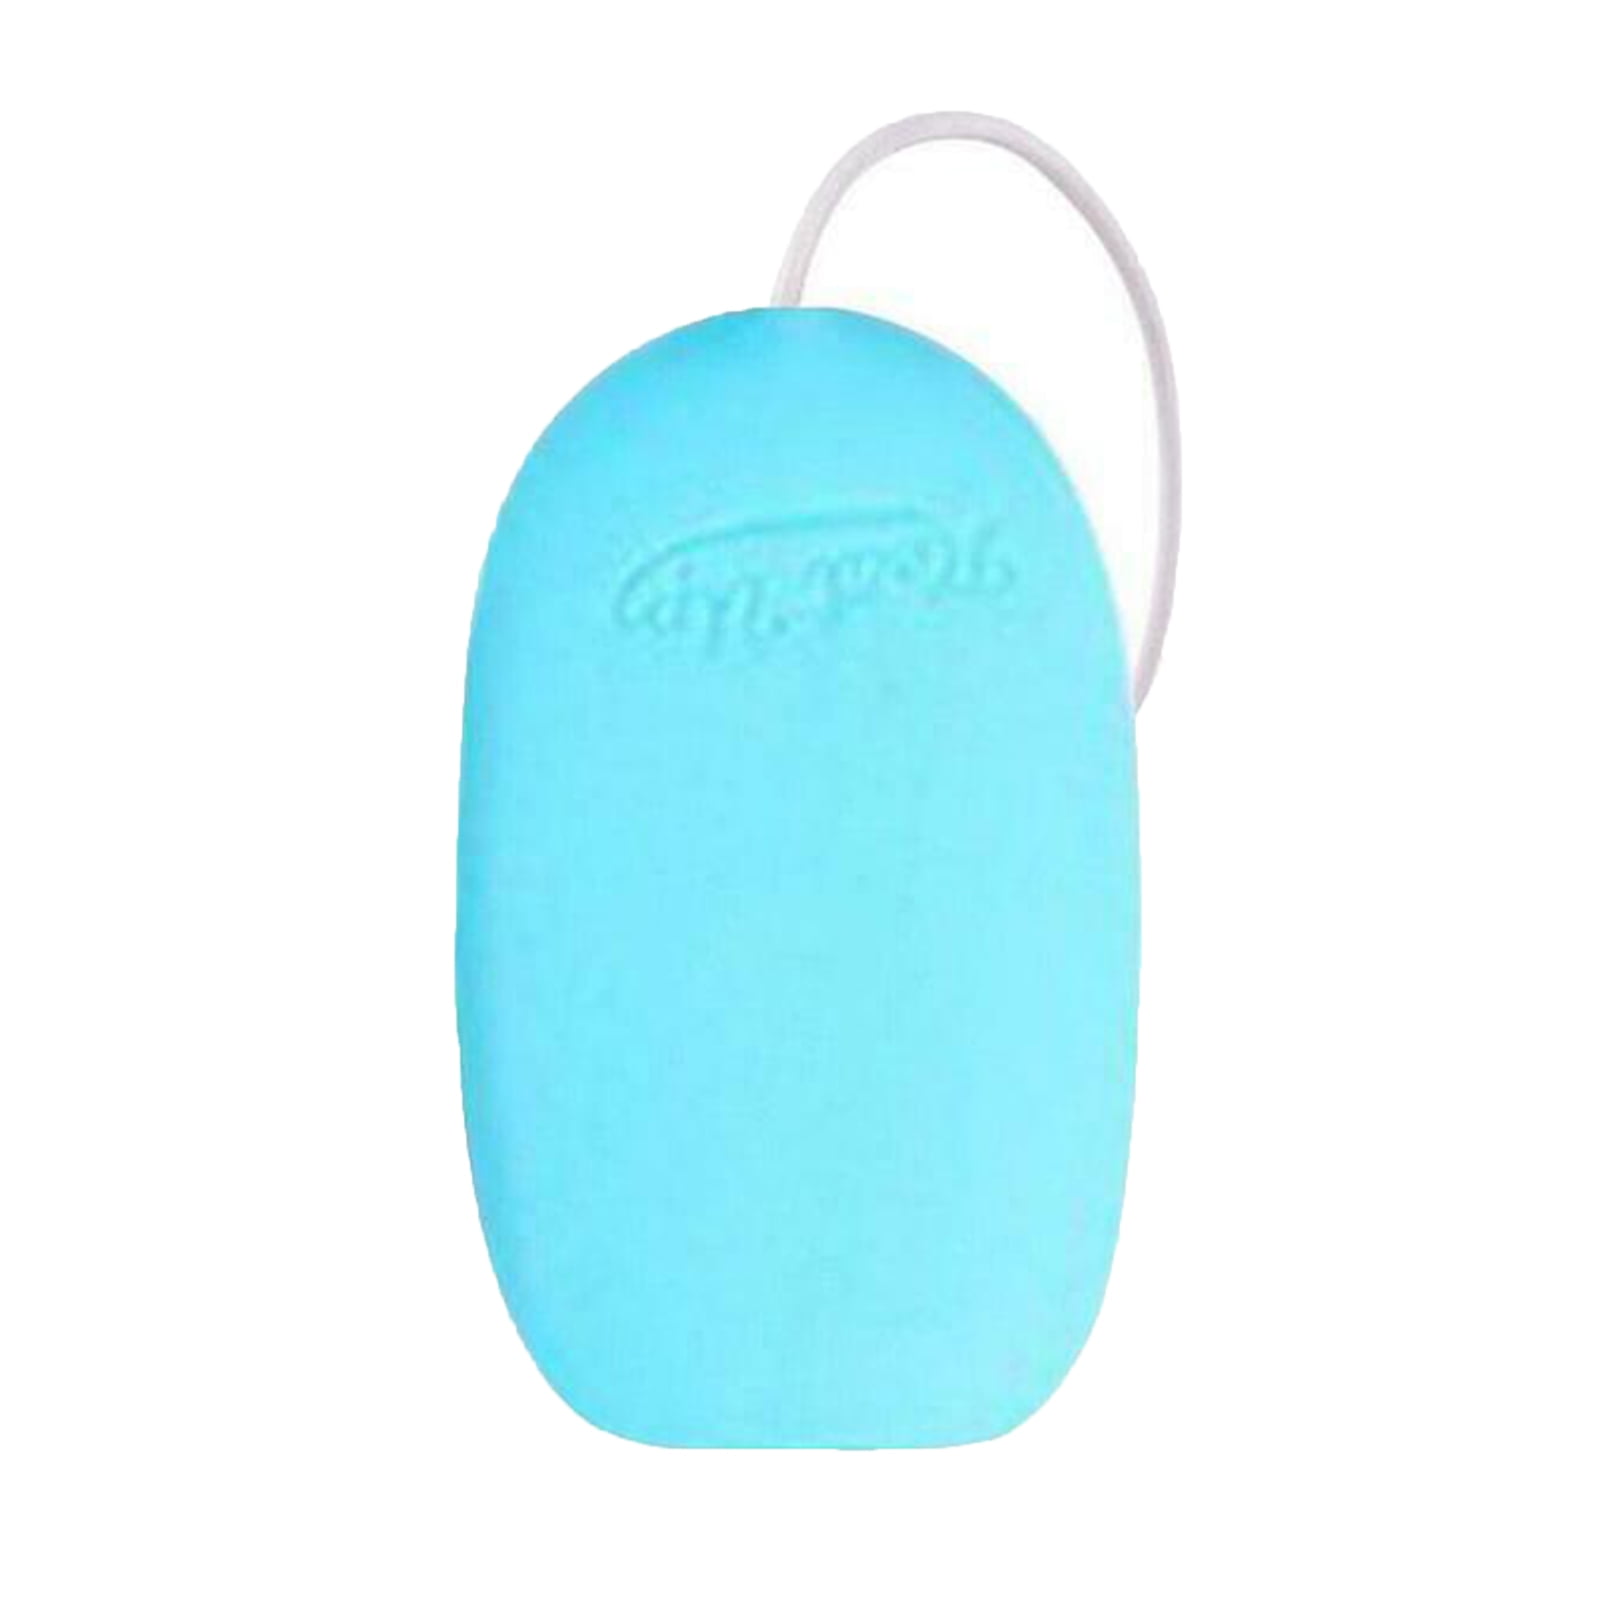 Details about   3 in 1 Rechargeable Hand Warmers Power Bank Electric Portable Pocket Hothands 